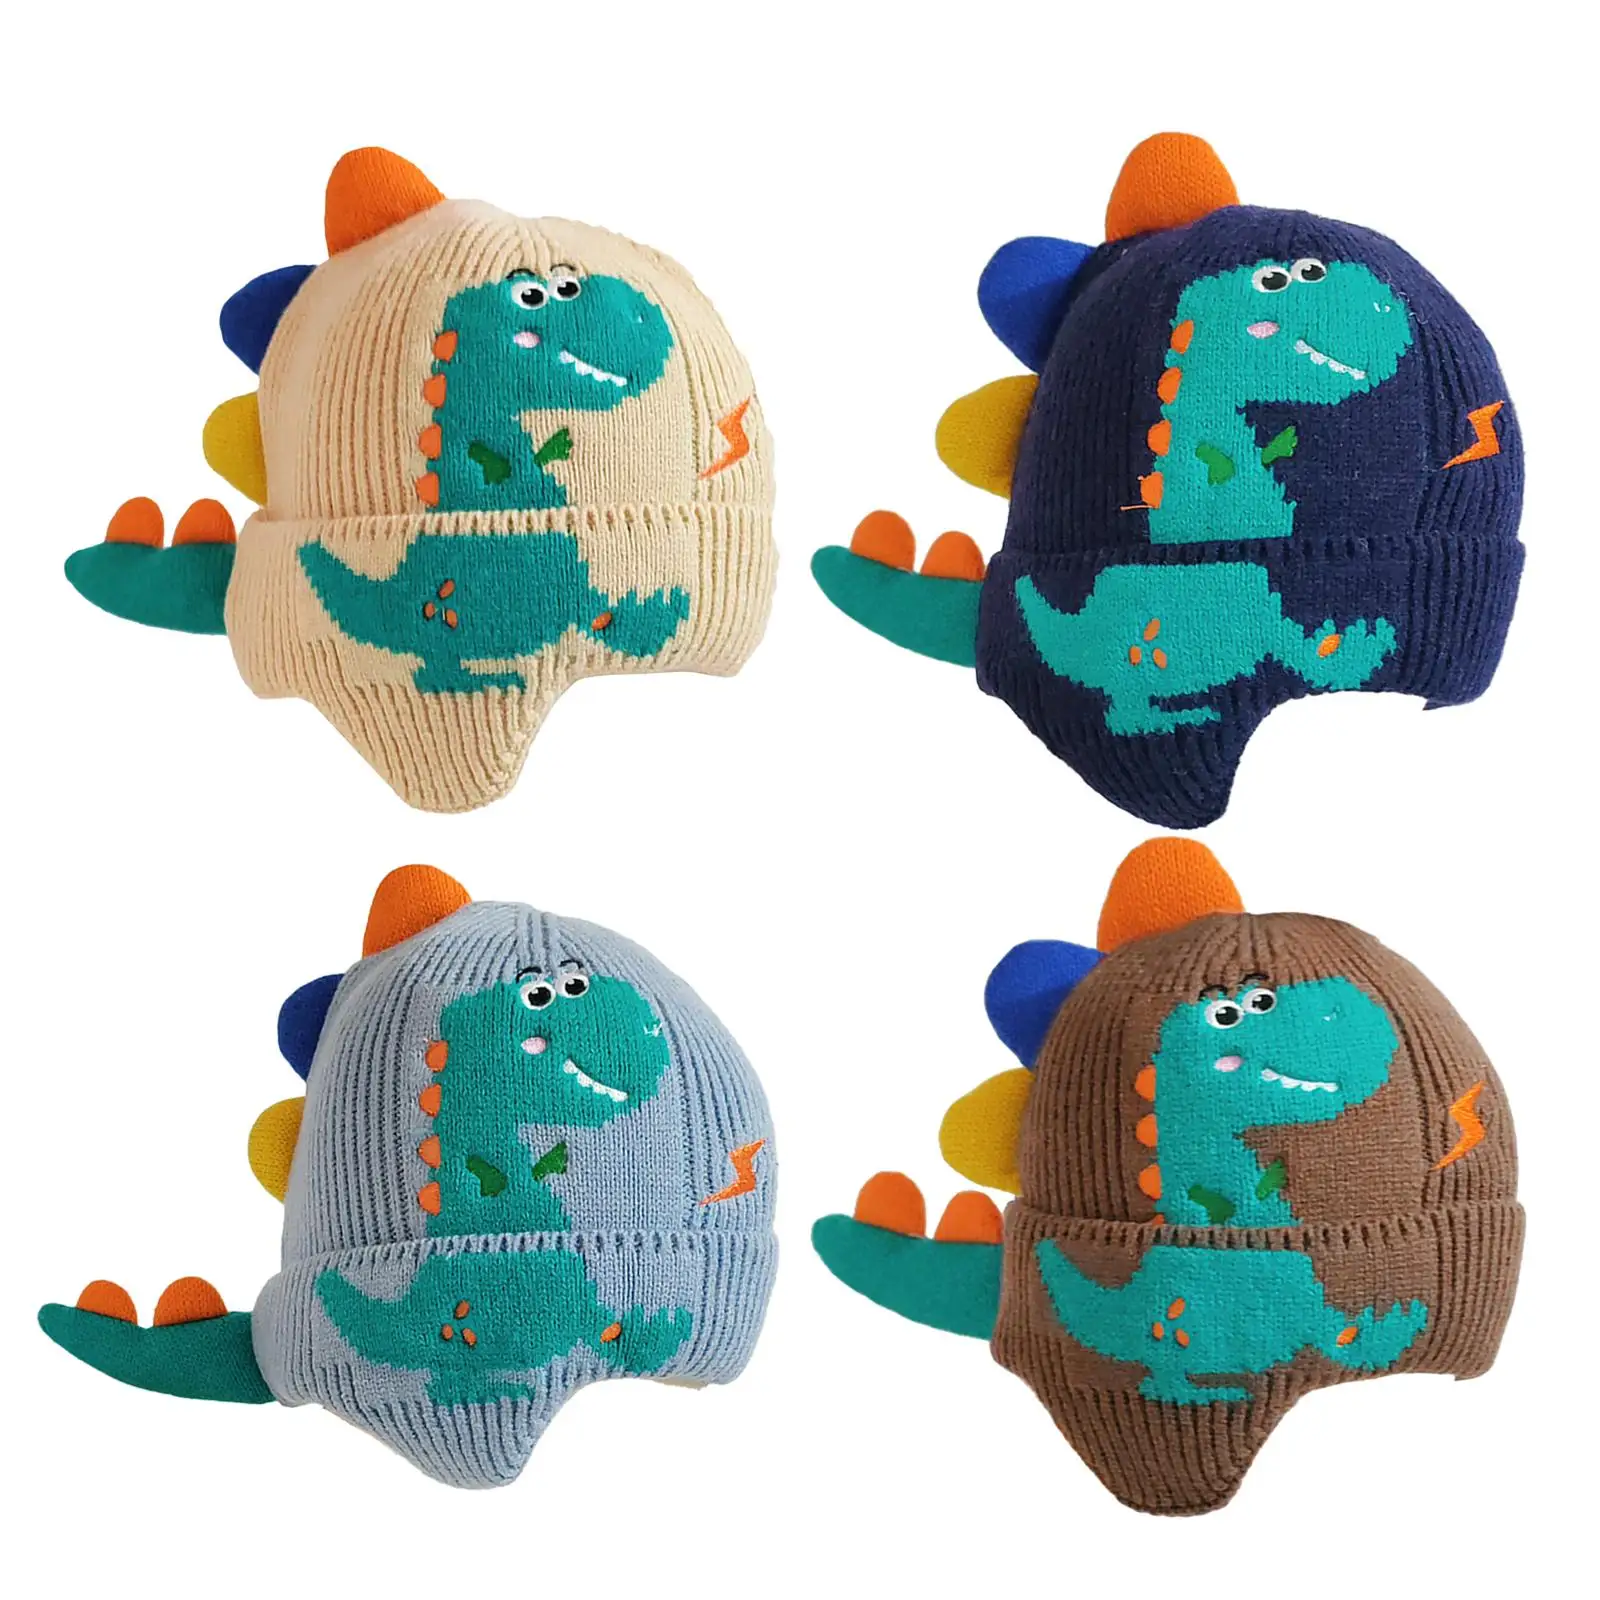 Dinosaur Ear Knitted Hat Skiing Hat Knit Hat for Kids Toddlers Boys Girls